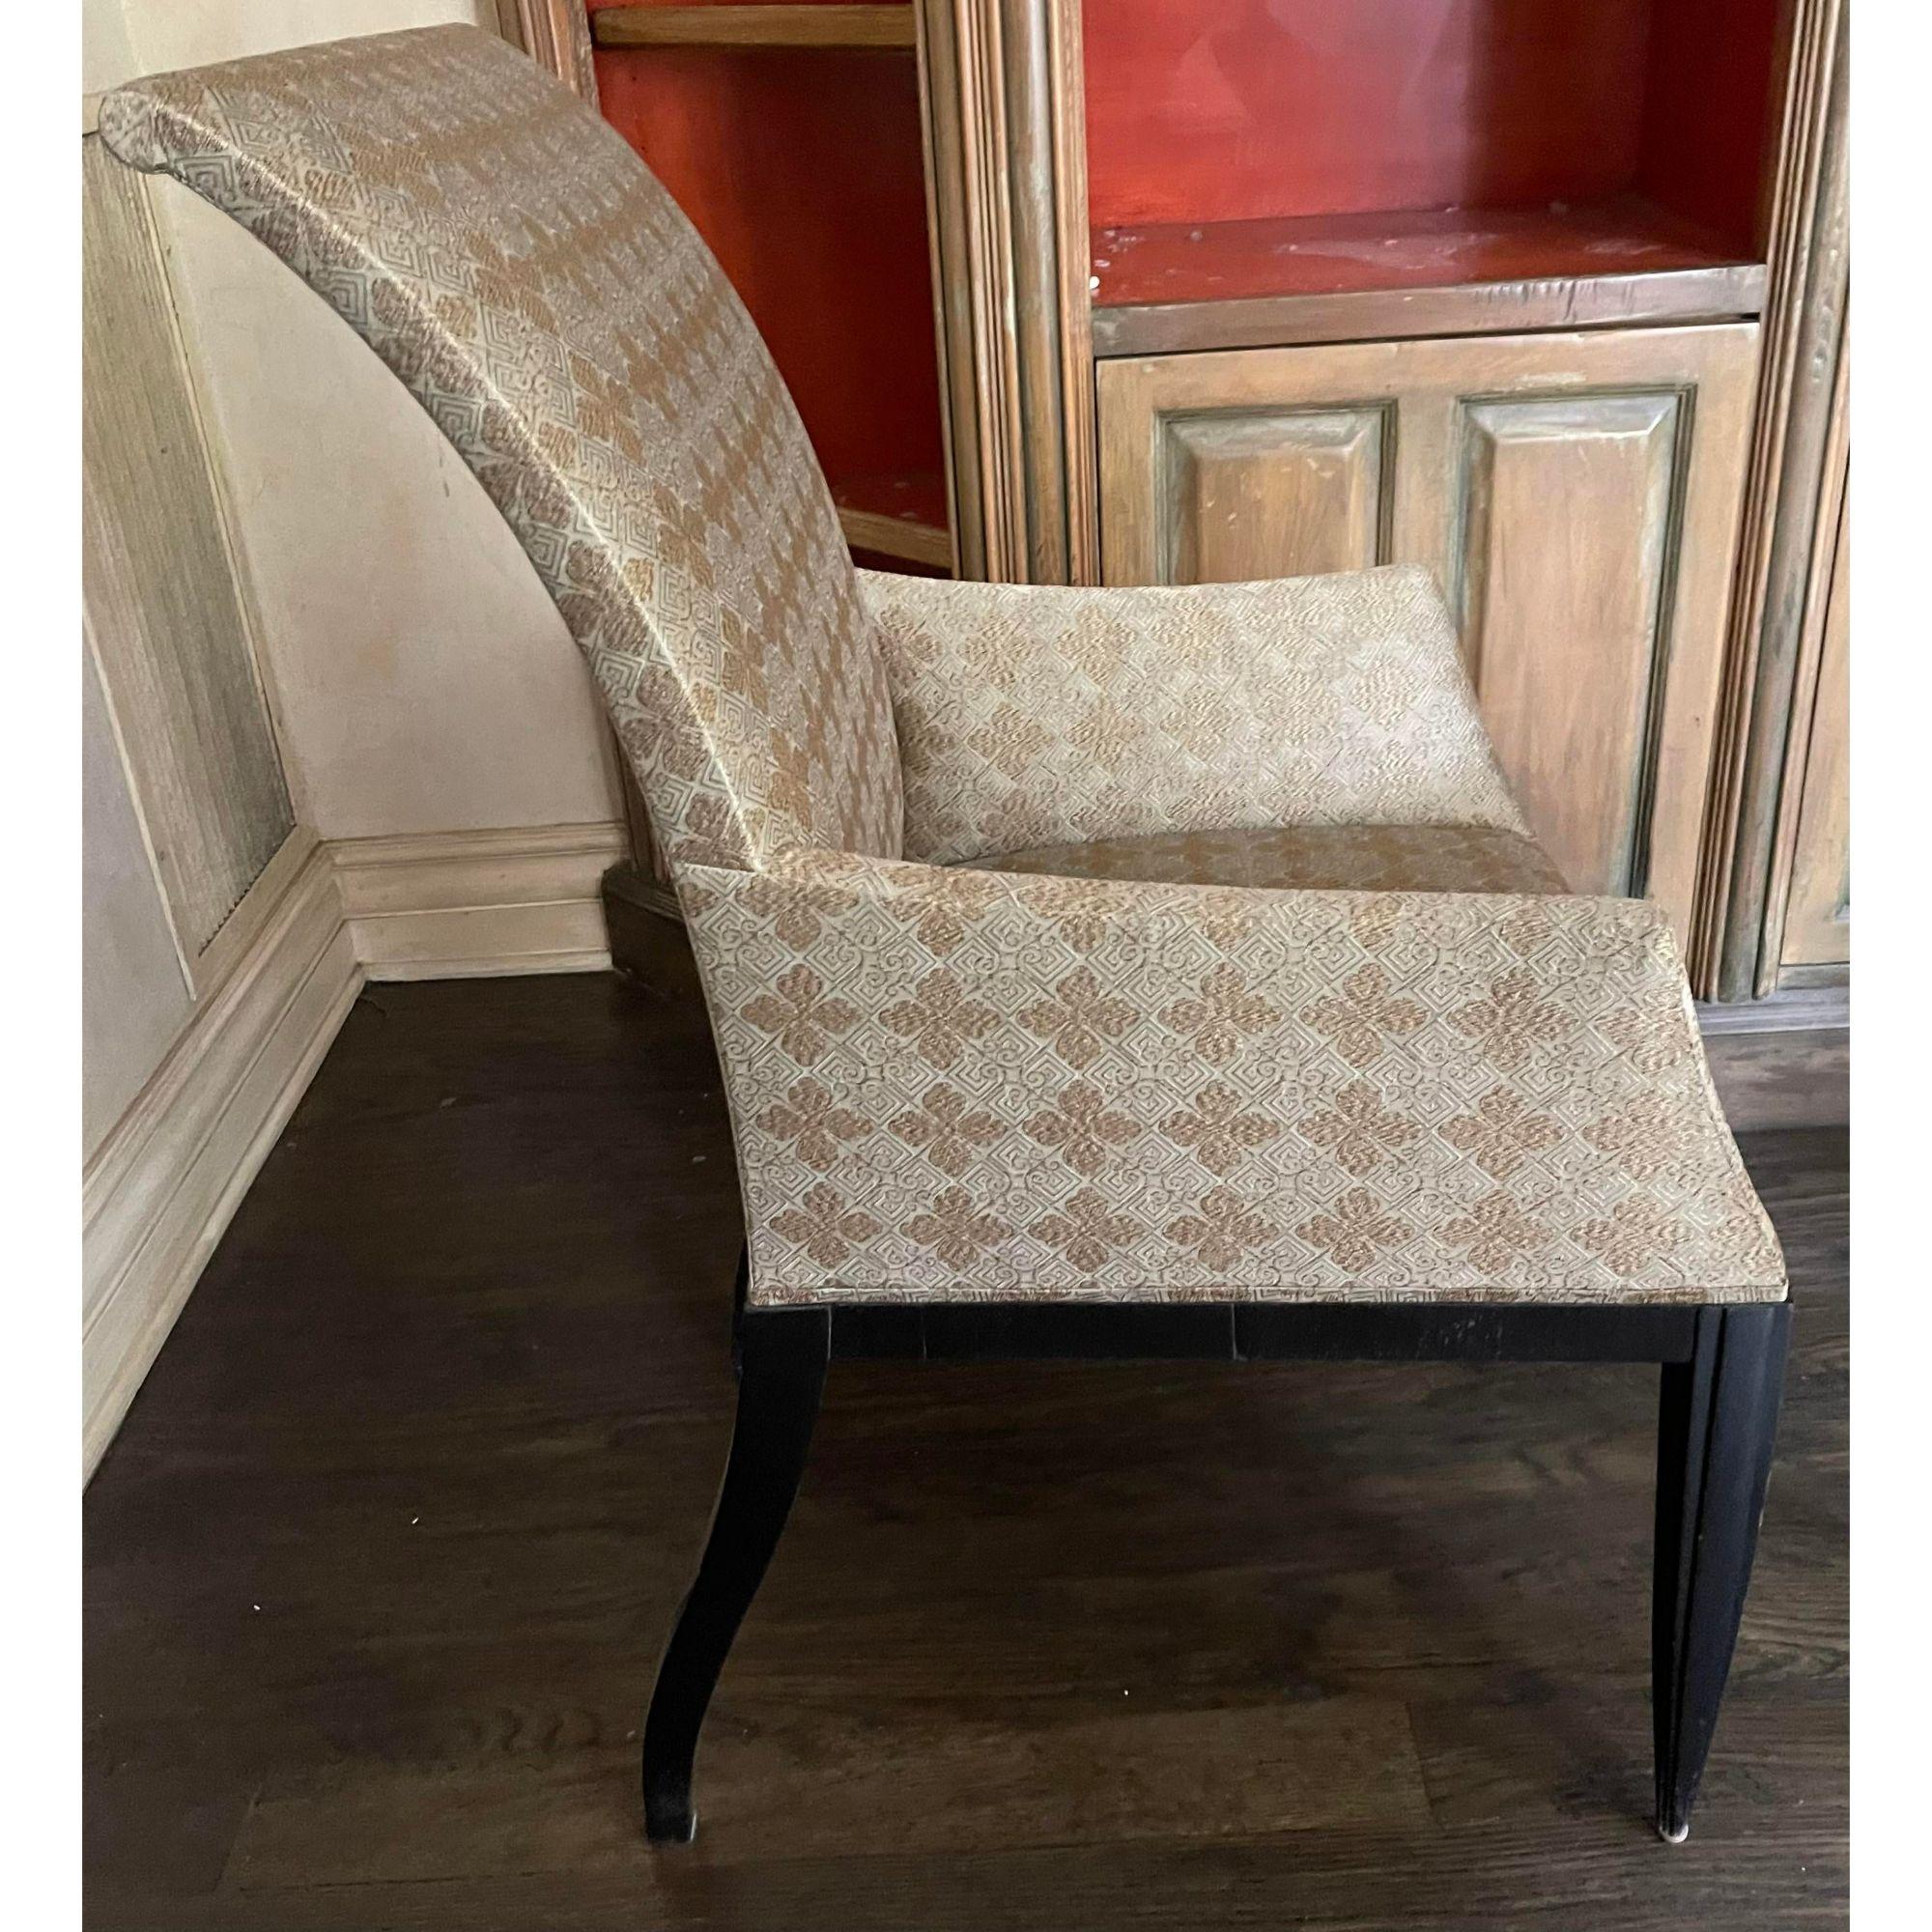 Priced each. Modern Gerard for Dessin Fournir Dining Arm Chair. It features art deco style front legs and dramatic saber legs in the back

Additional information: 
Materials: Linen, Wood
Color: Olive
Brand: Dessin Fournir
Designer: Dessin